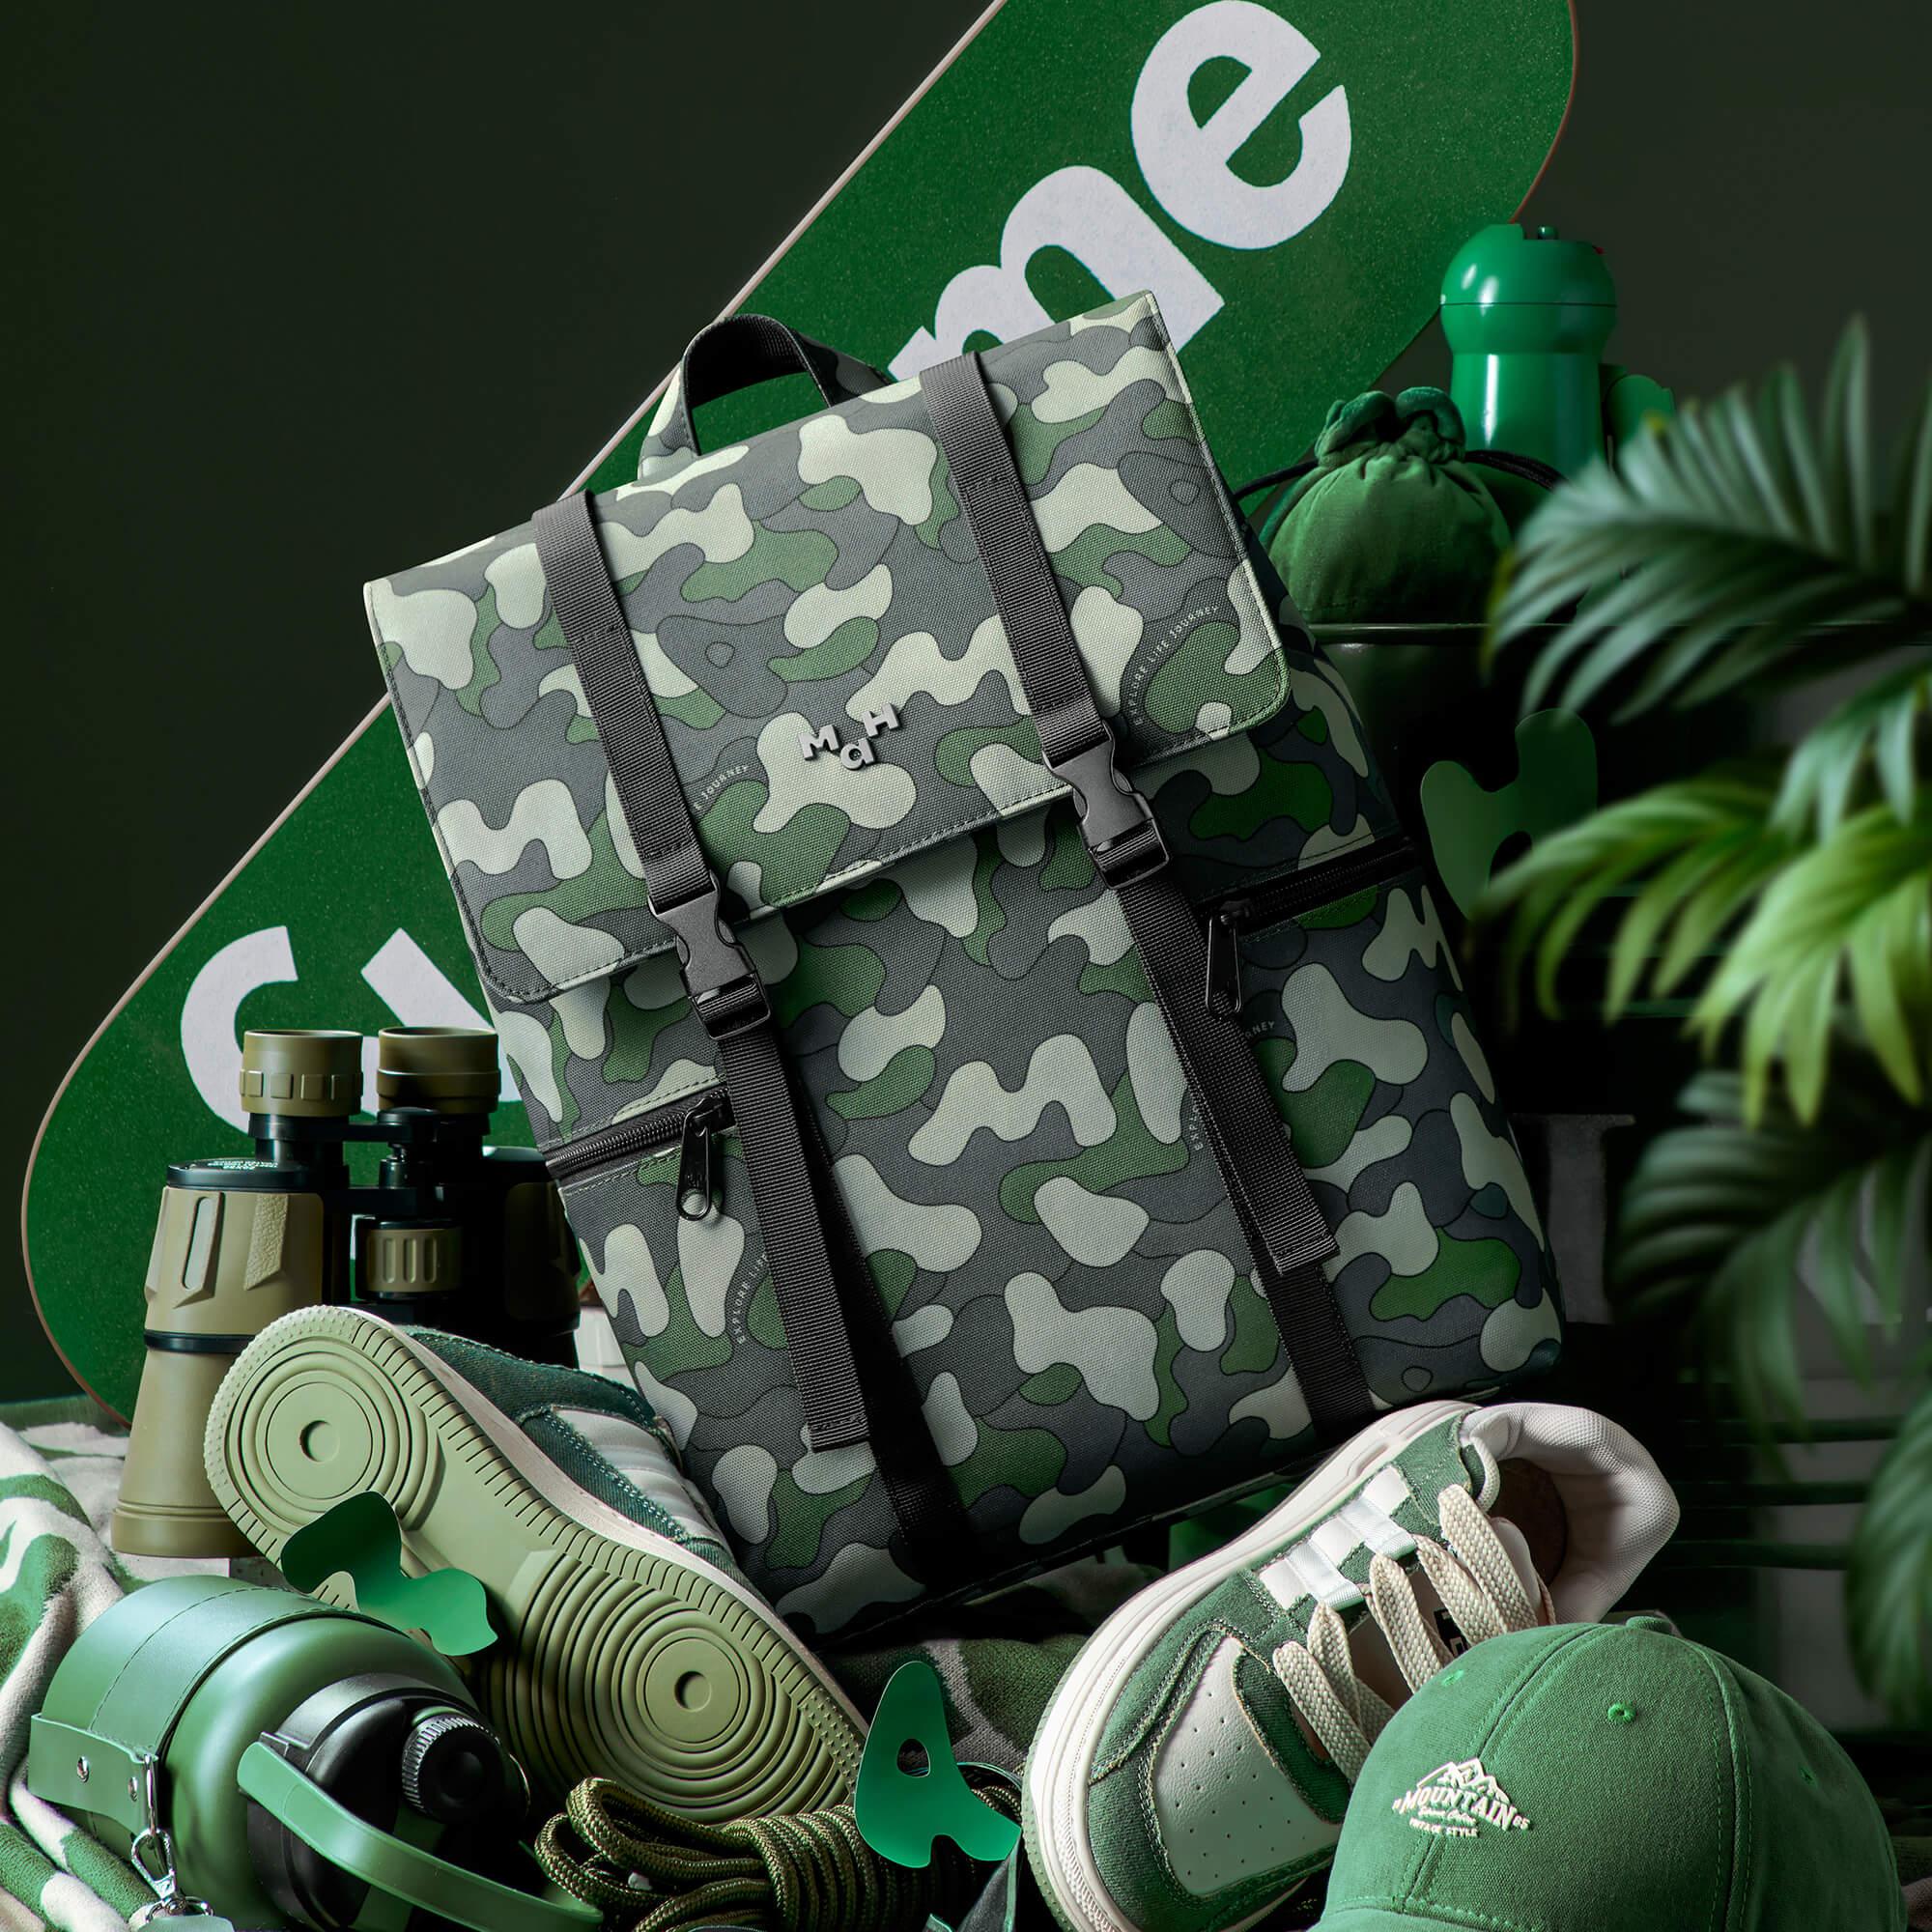 Siro Backpack | Camouflage | 11L